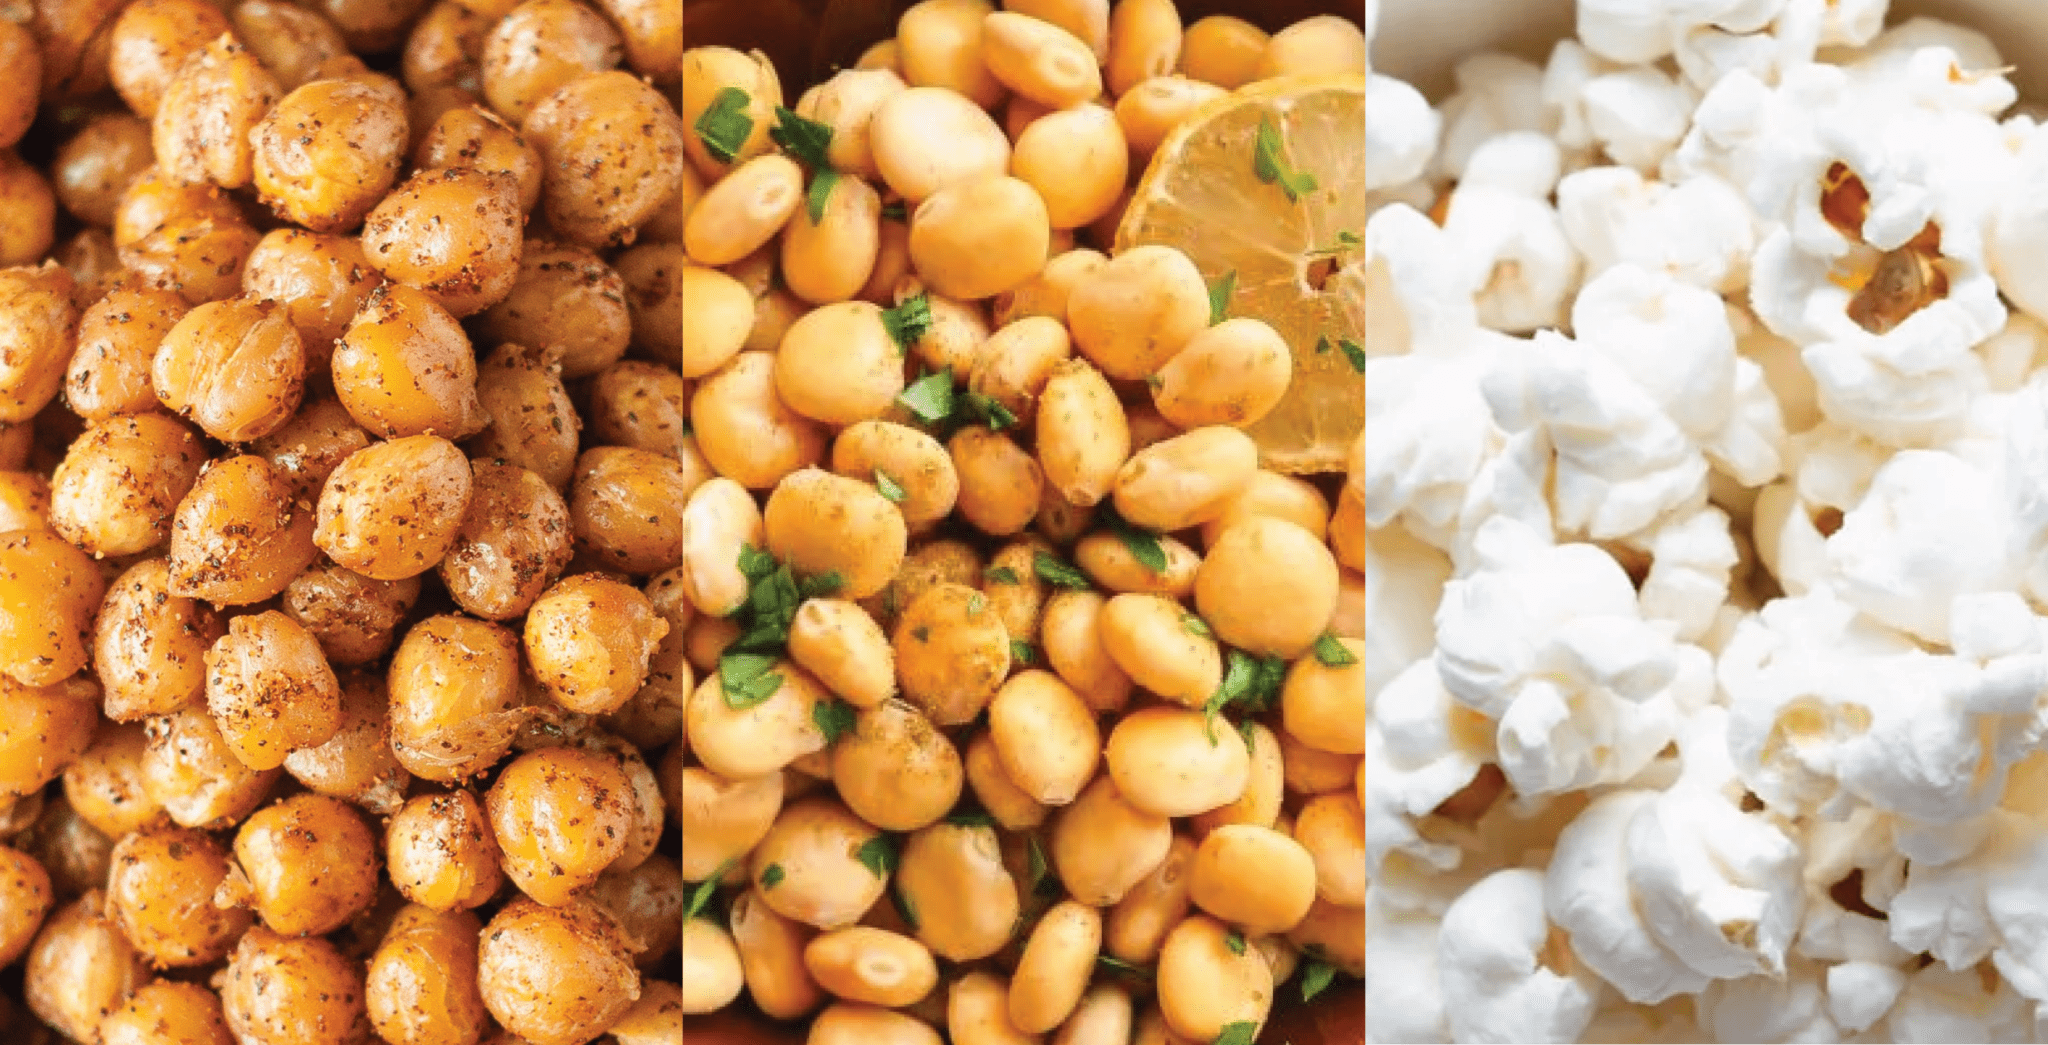 healthy snack - chickpeas, lupines, and popcorn